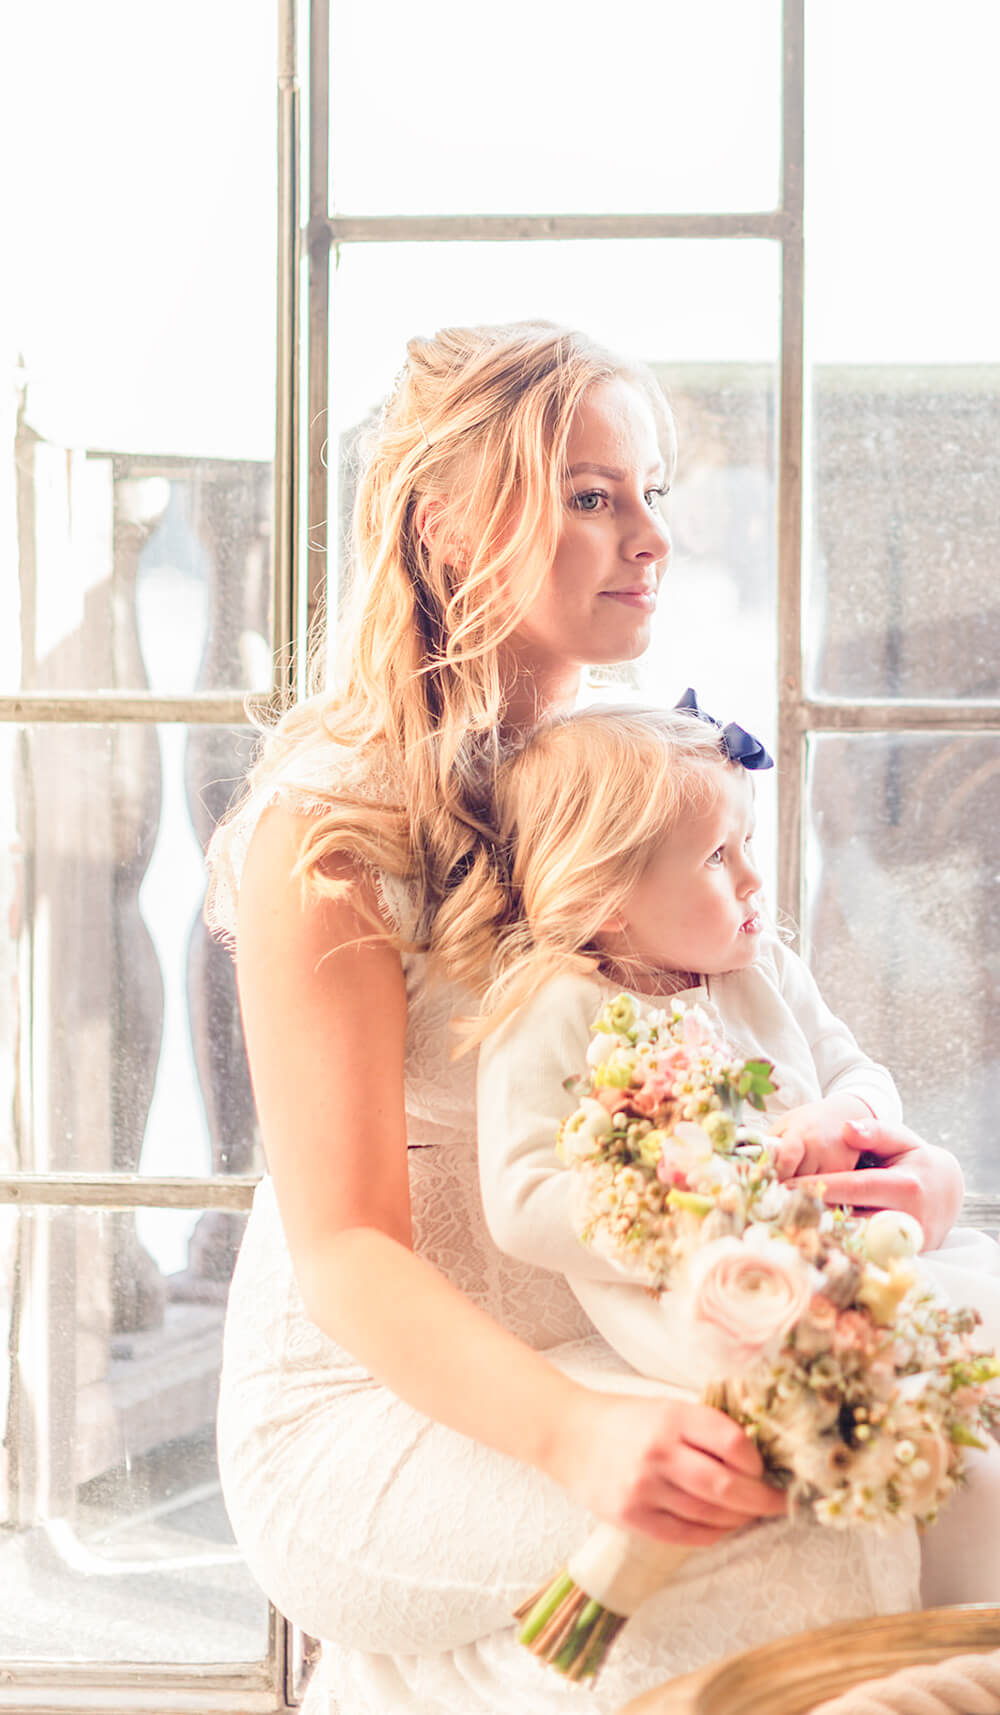 Bride and flower girl with matching wedding bouquets